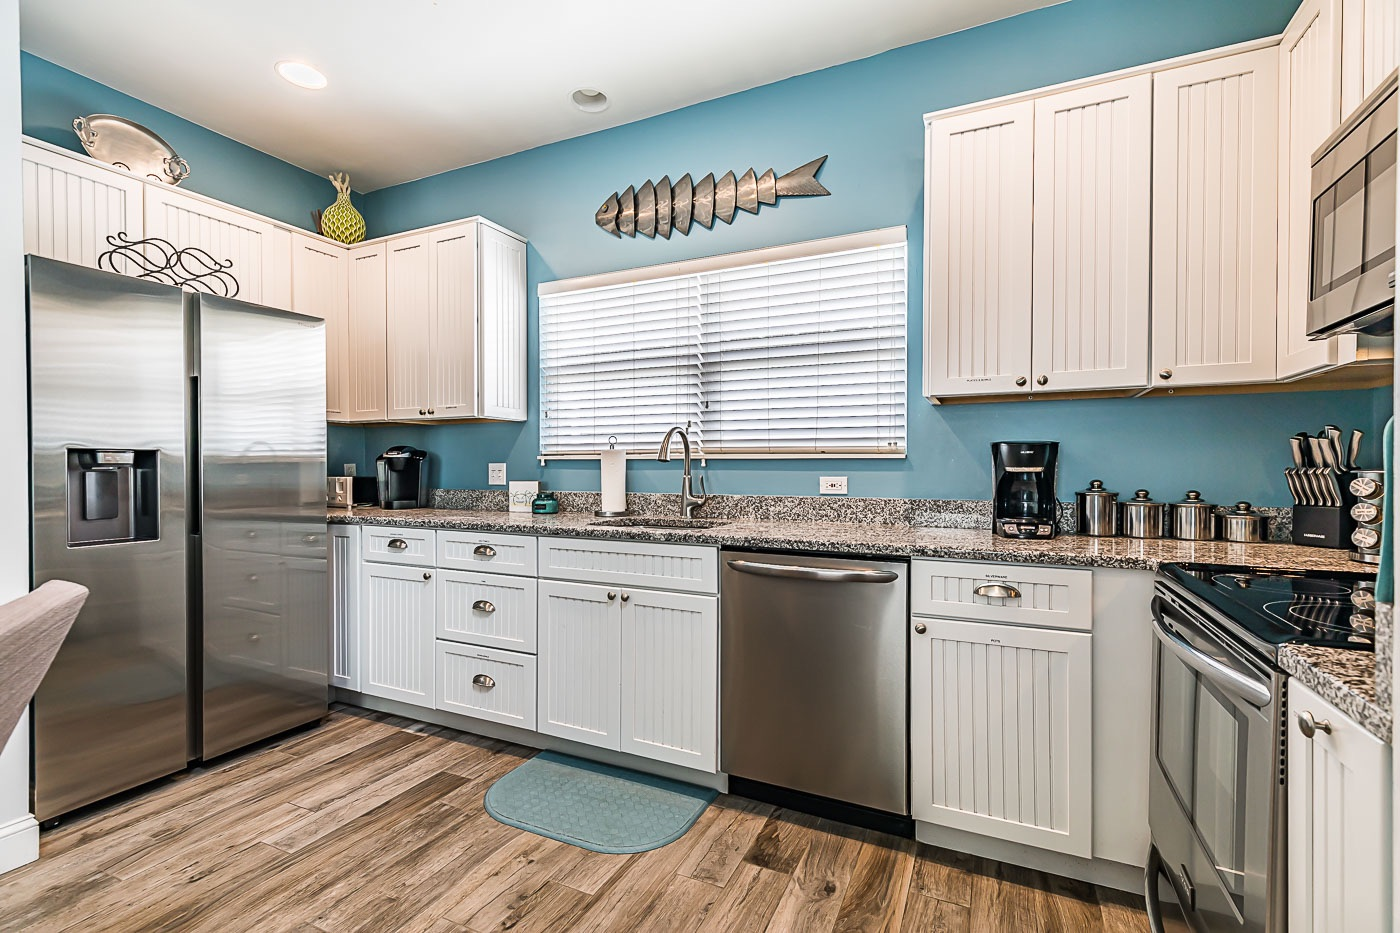 Fully stocked kitchen includes Keurig & traditional drip coffee maker. 